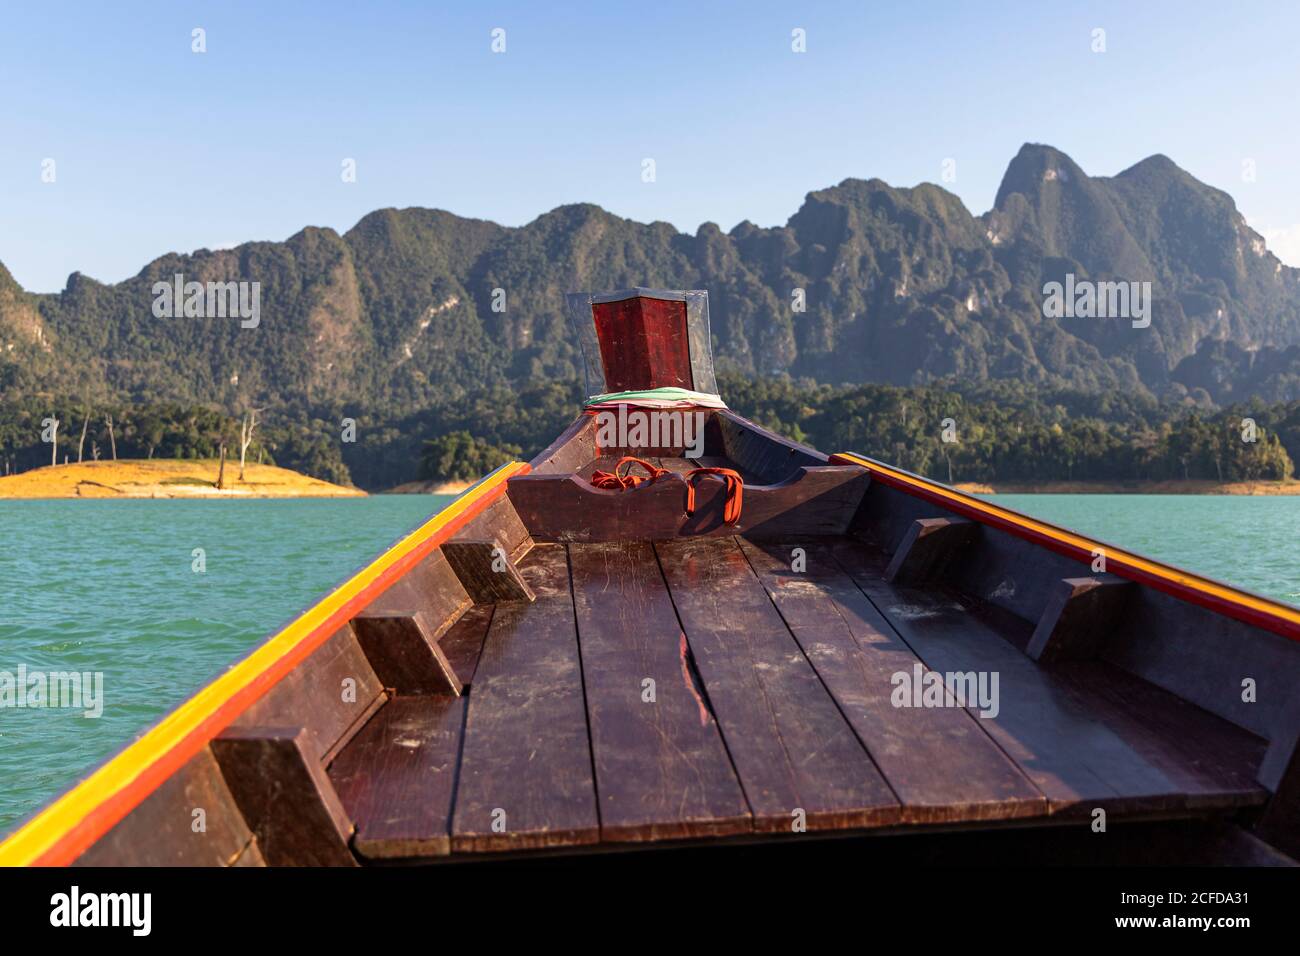 Top of a longtail boat on the Ratchaprapha lake with high karst rocks in the Khao Sok National Park, Khao Sok. Thailand Stock Photo